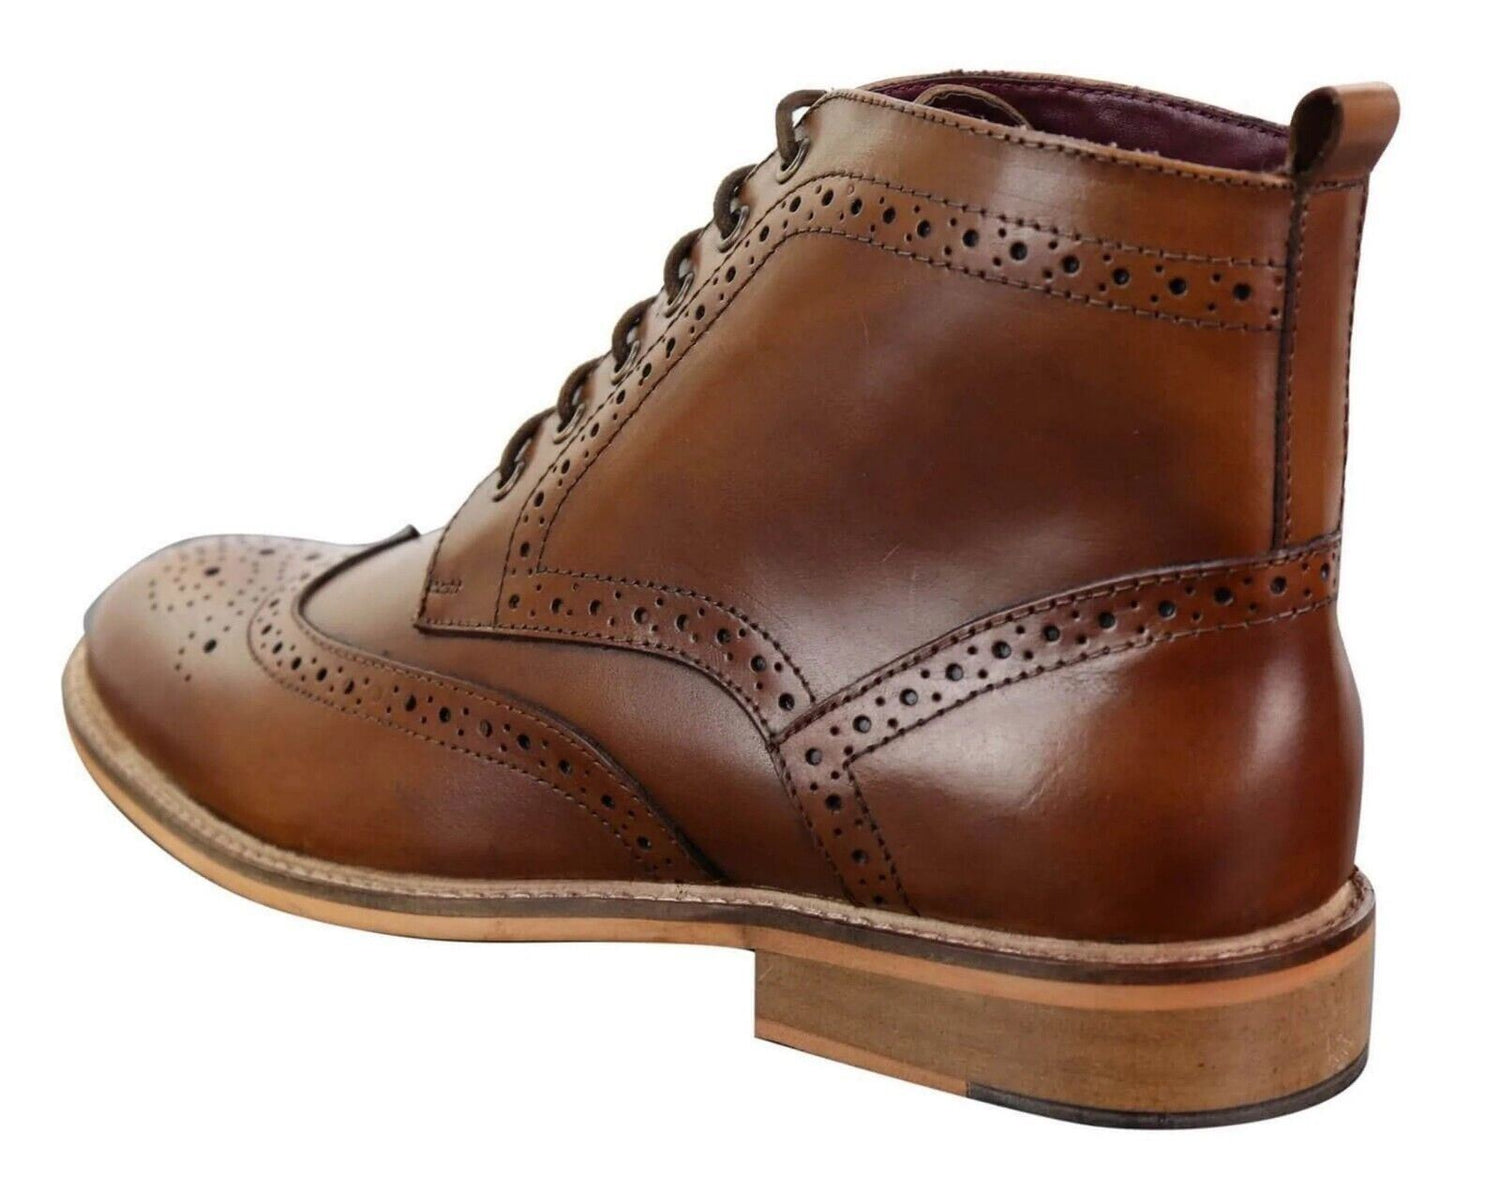 Mens Classic Oxford Brogue Ankle Boots in Tan Leather - Upperclass Fashions 